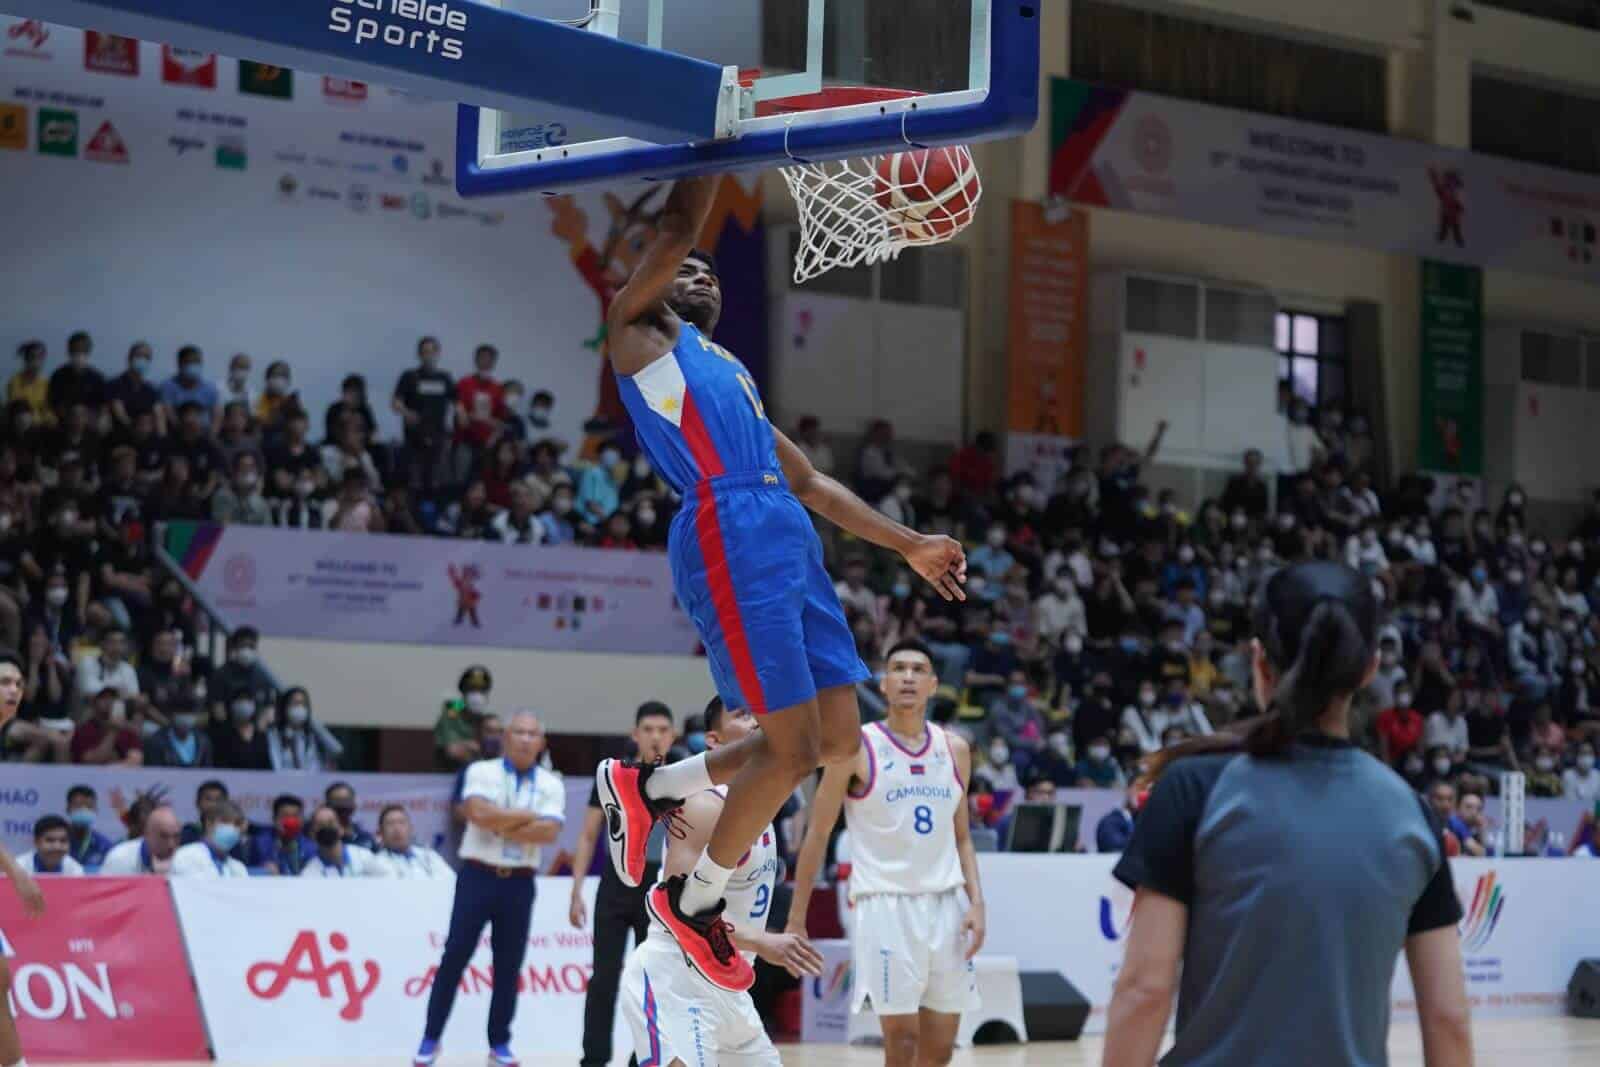 A basketball player showcases their dunking skills to an excited crowd.